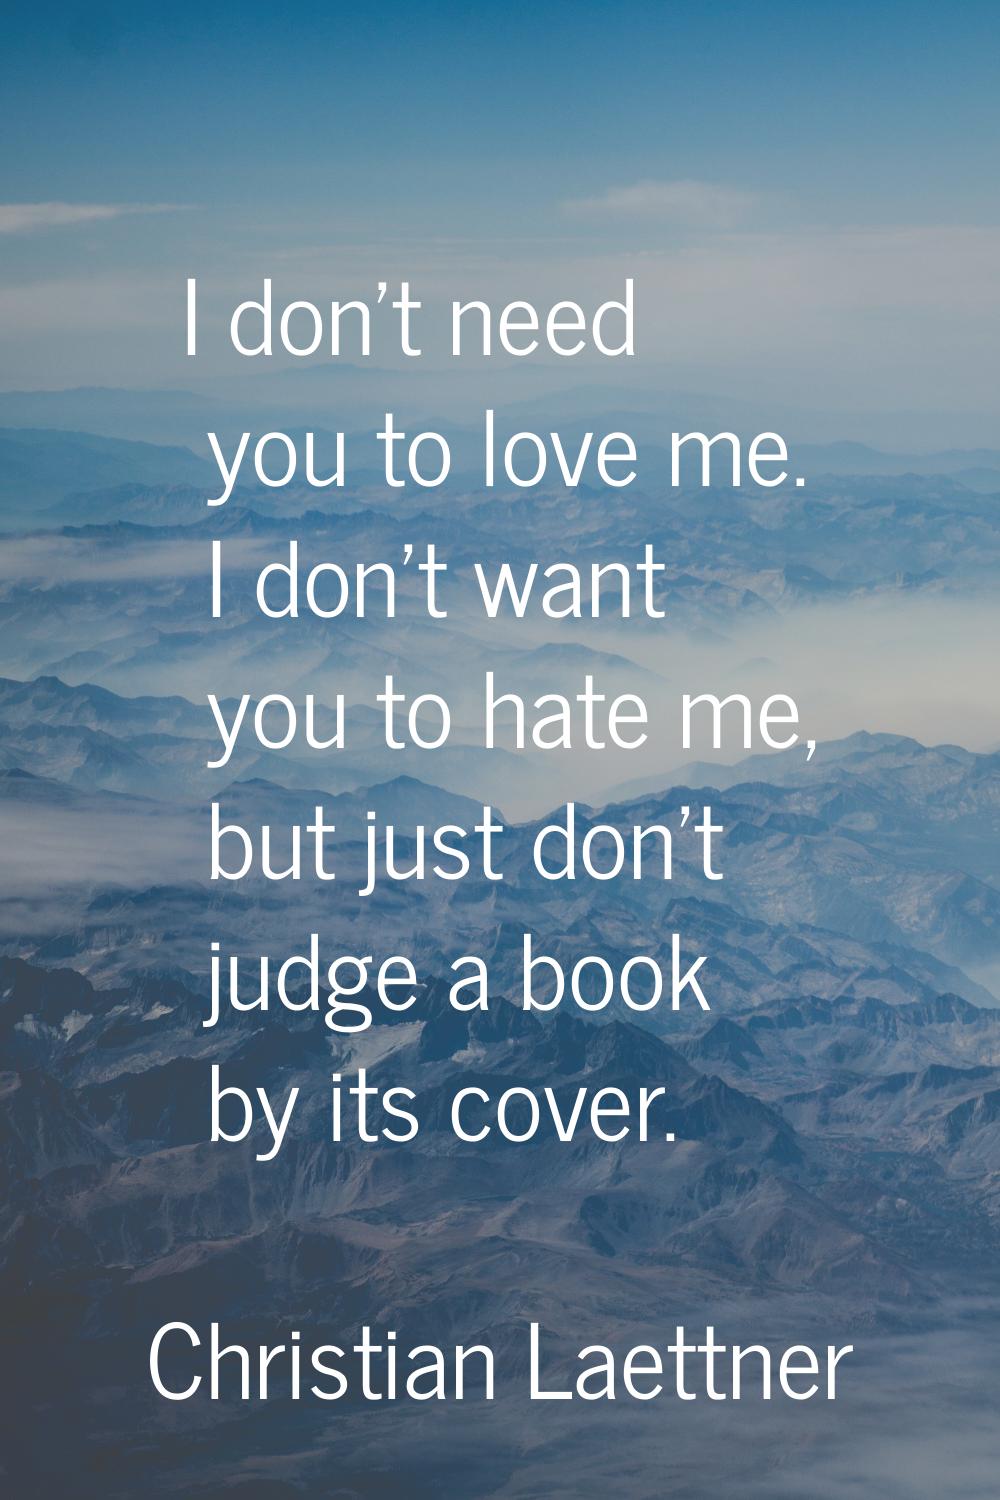 I don't need you to love me. I don't want you to hate me, but just don't judge a book by its cover.